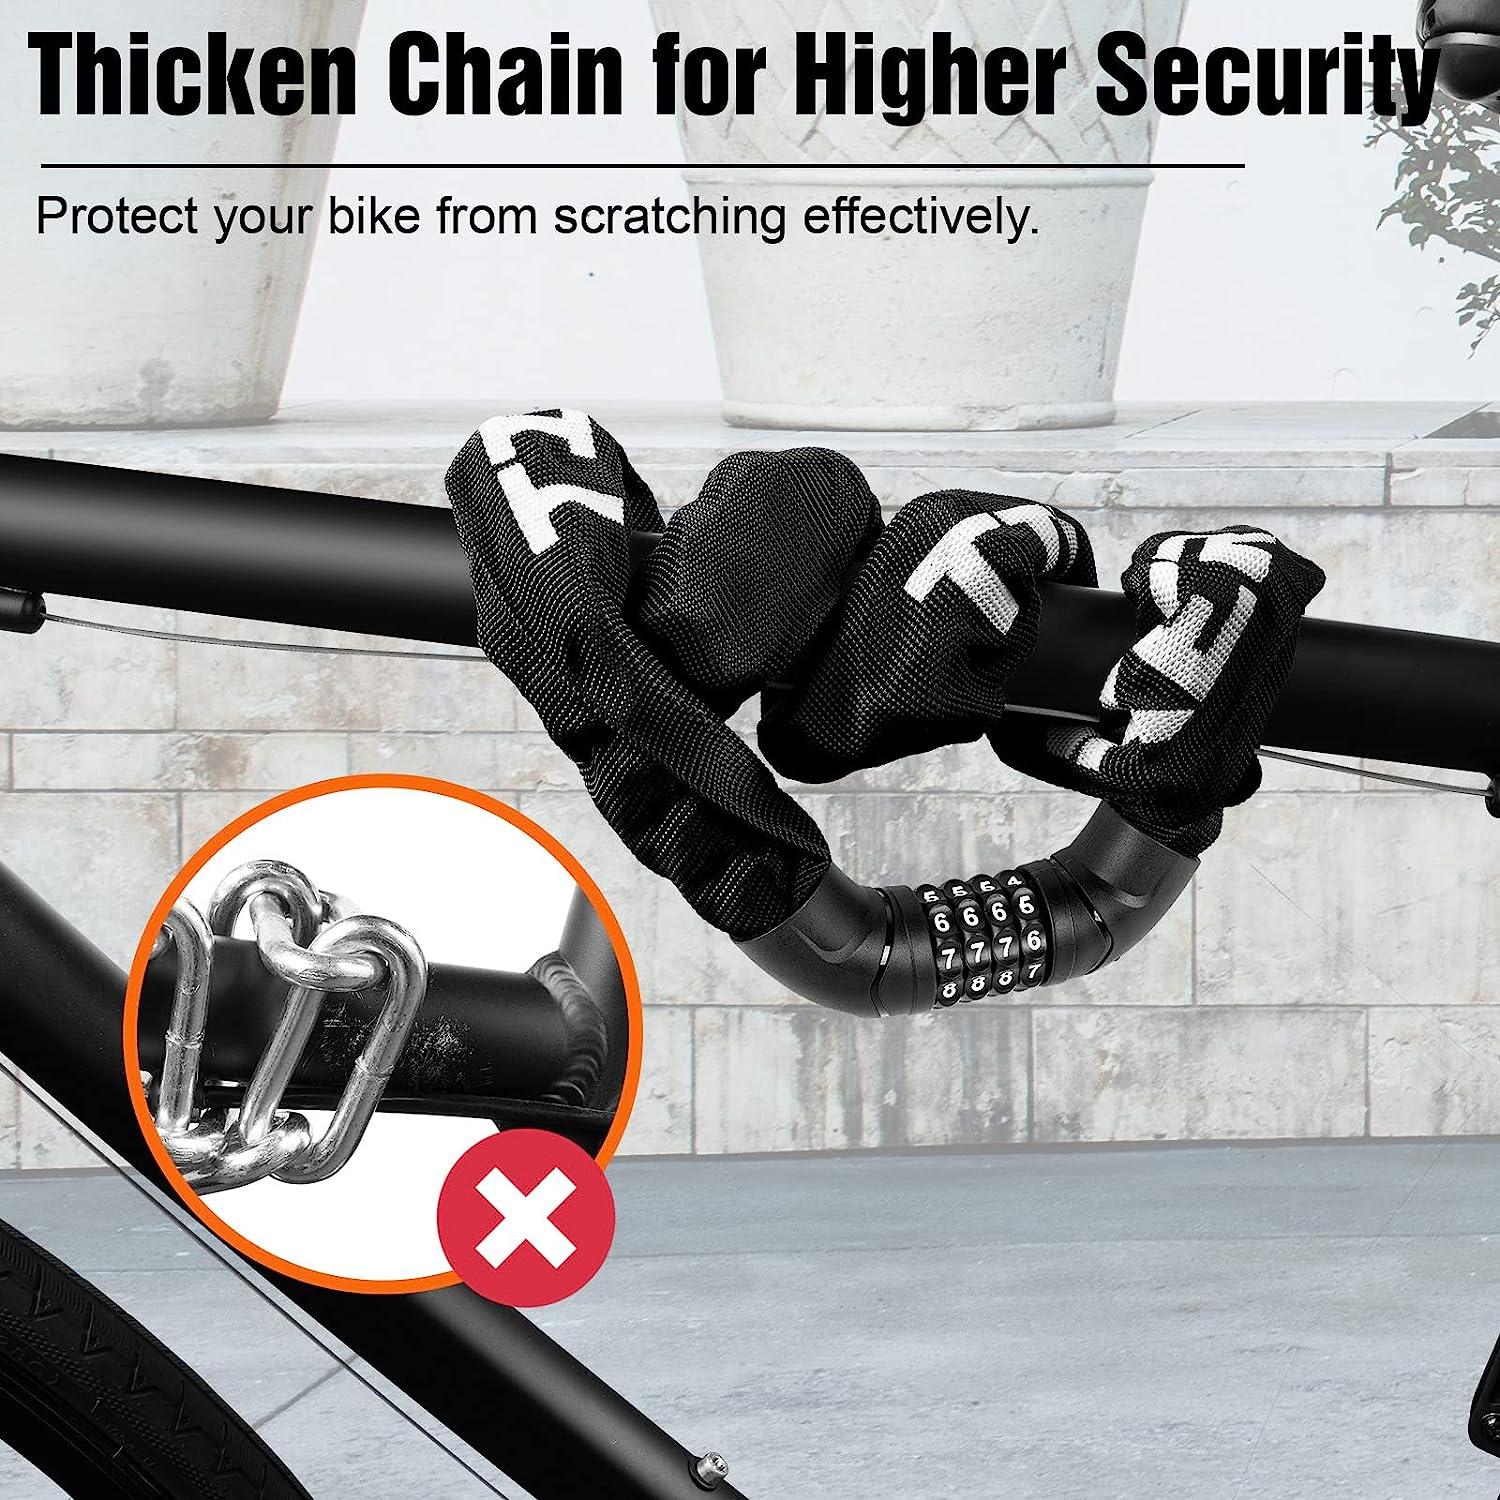 Titanker Bike Chain Lock, Security Anti-Theft Bike Lock Chain Resettable  Combination Bicycle Chain Lock 3 Feet Bike Locks for Bike, Motorcycle,  Bicycle, Door, Gate, Fence, Grill (6mm, 8mm Thick Chain) 8mm Combination